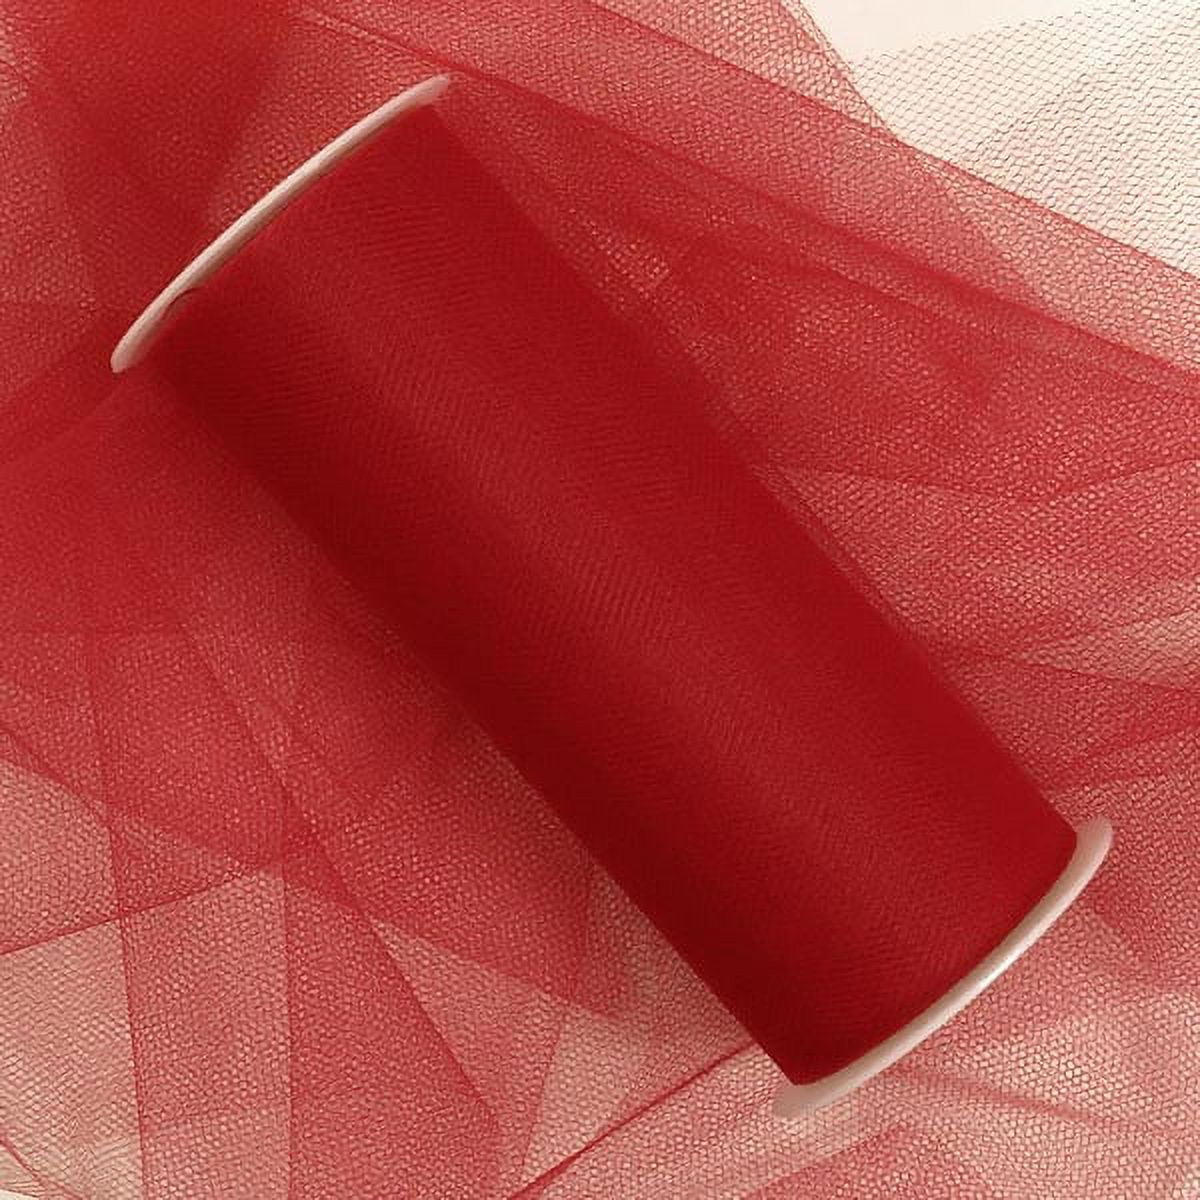 White Tulle Rolls 18 X 25 Yards by Paper Mart